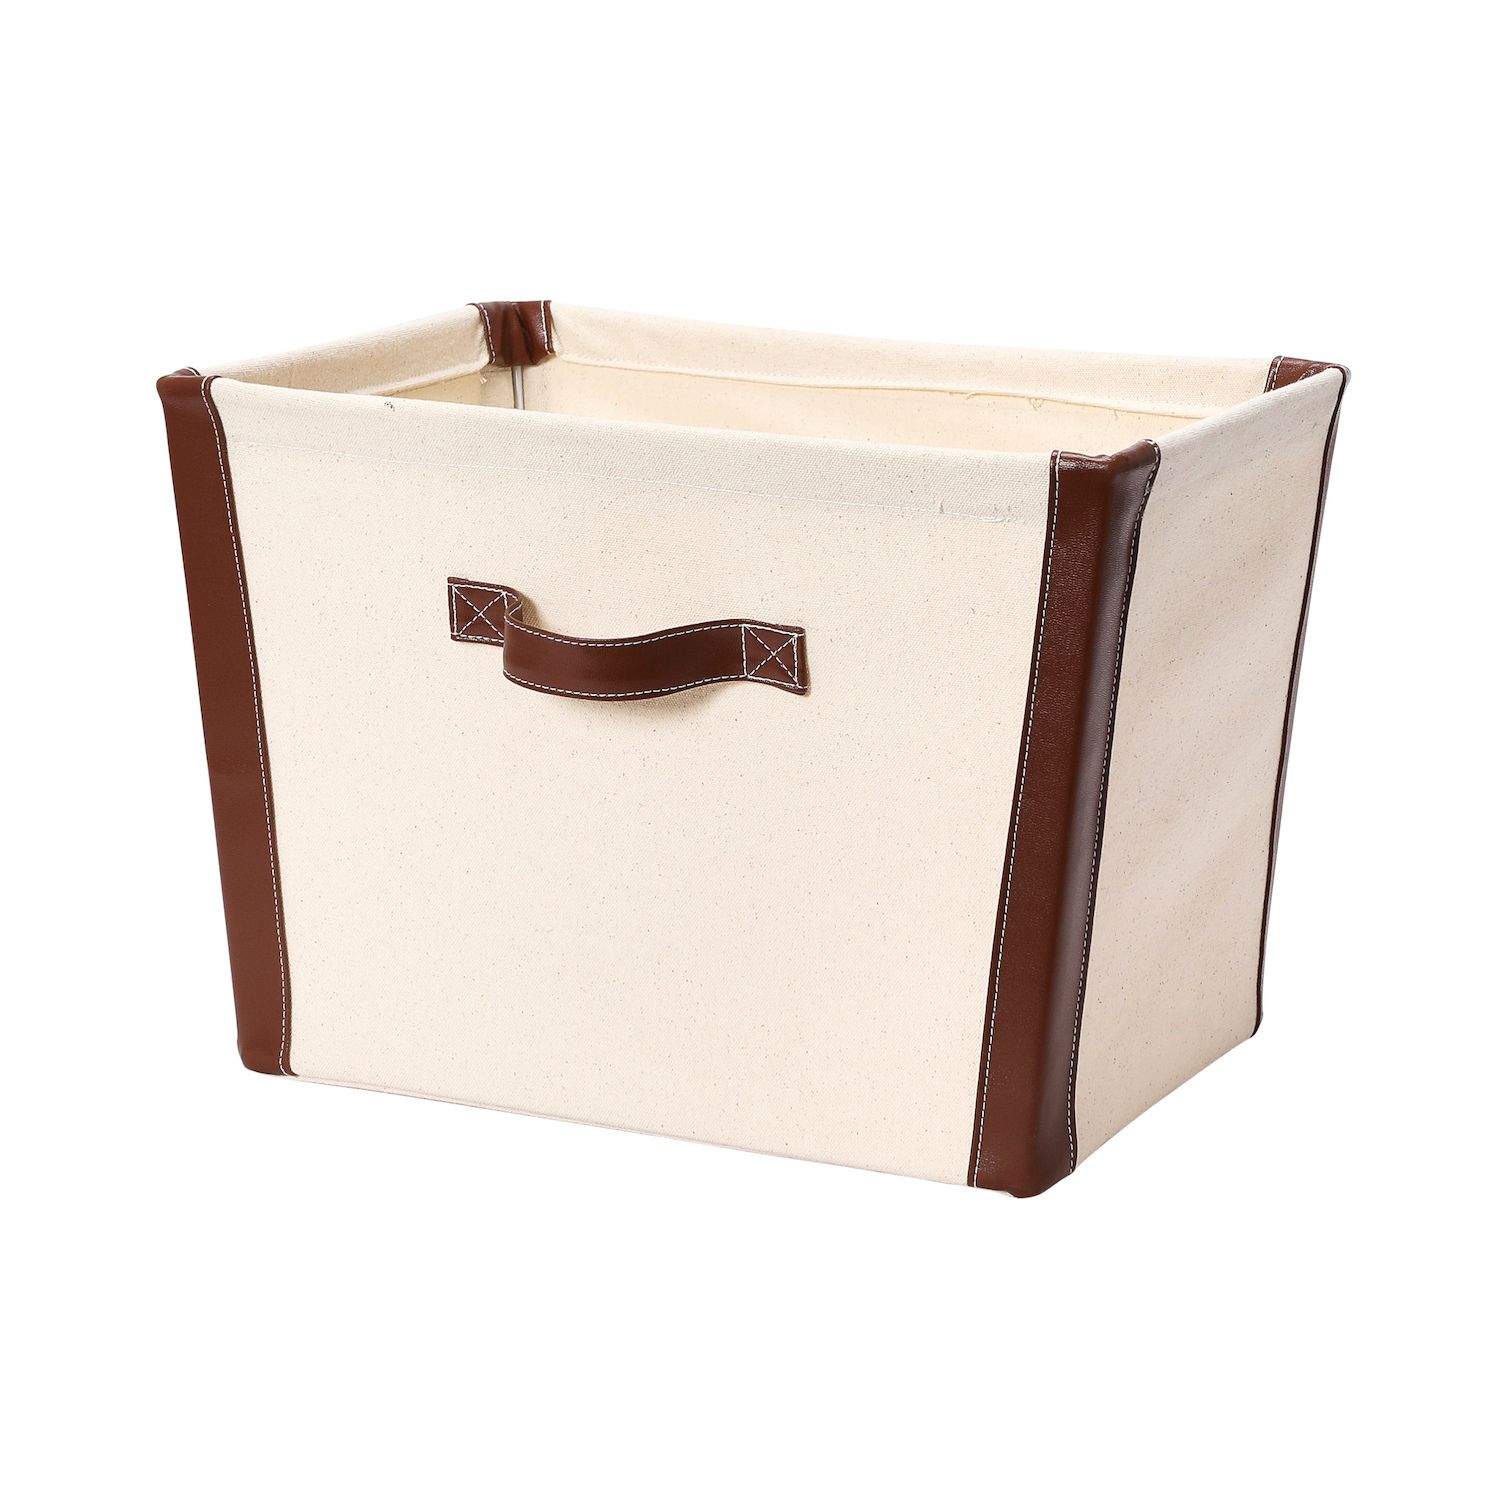 Ornavo Home Foldable Linen Storage Cube Bin with Leather Handles - Set of 6 - Beige